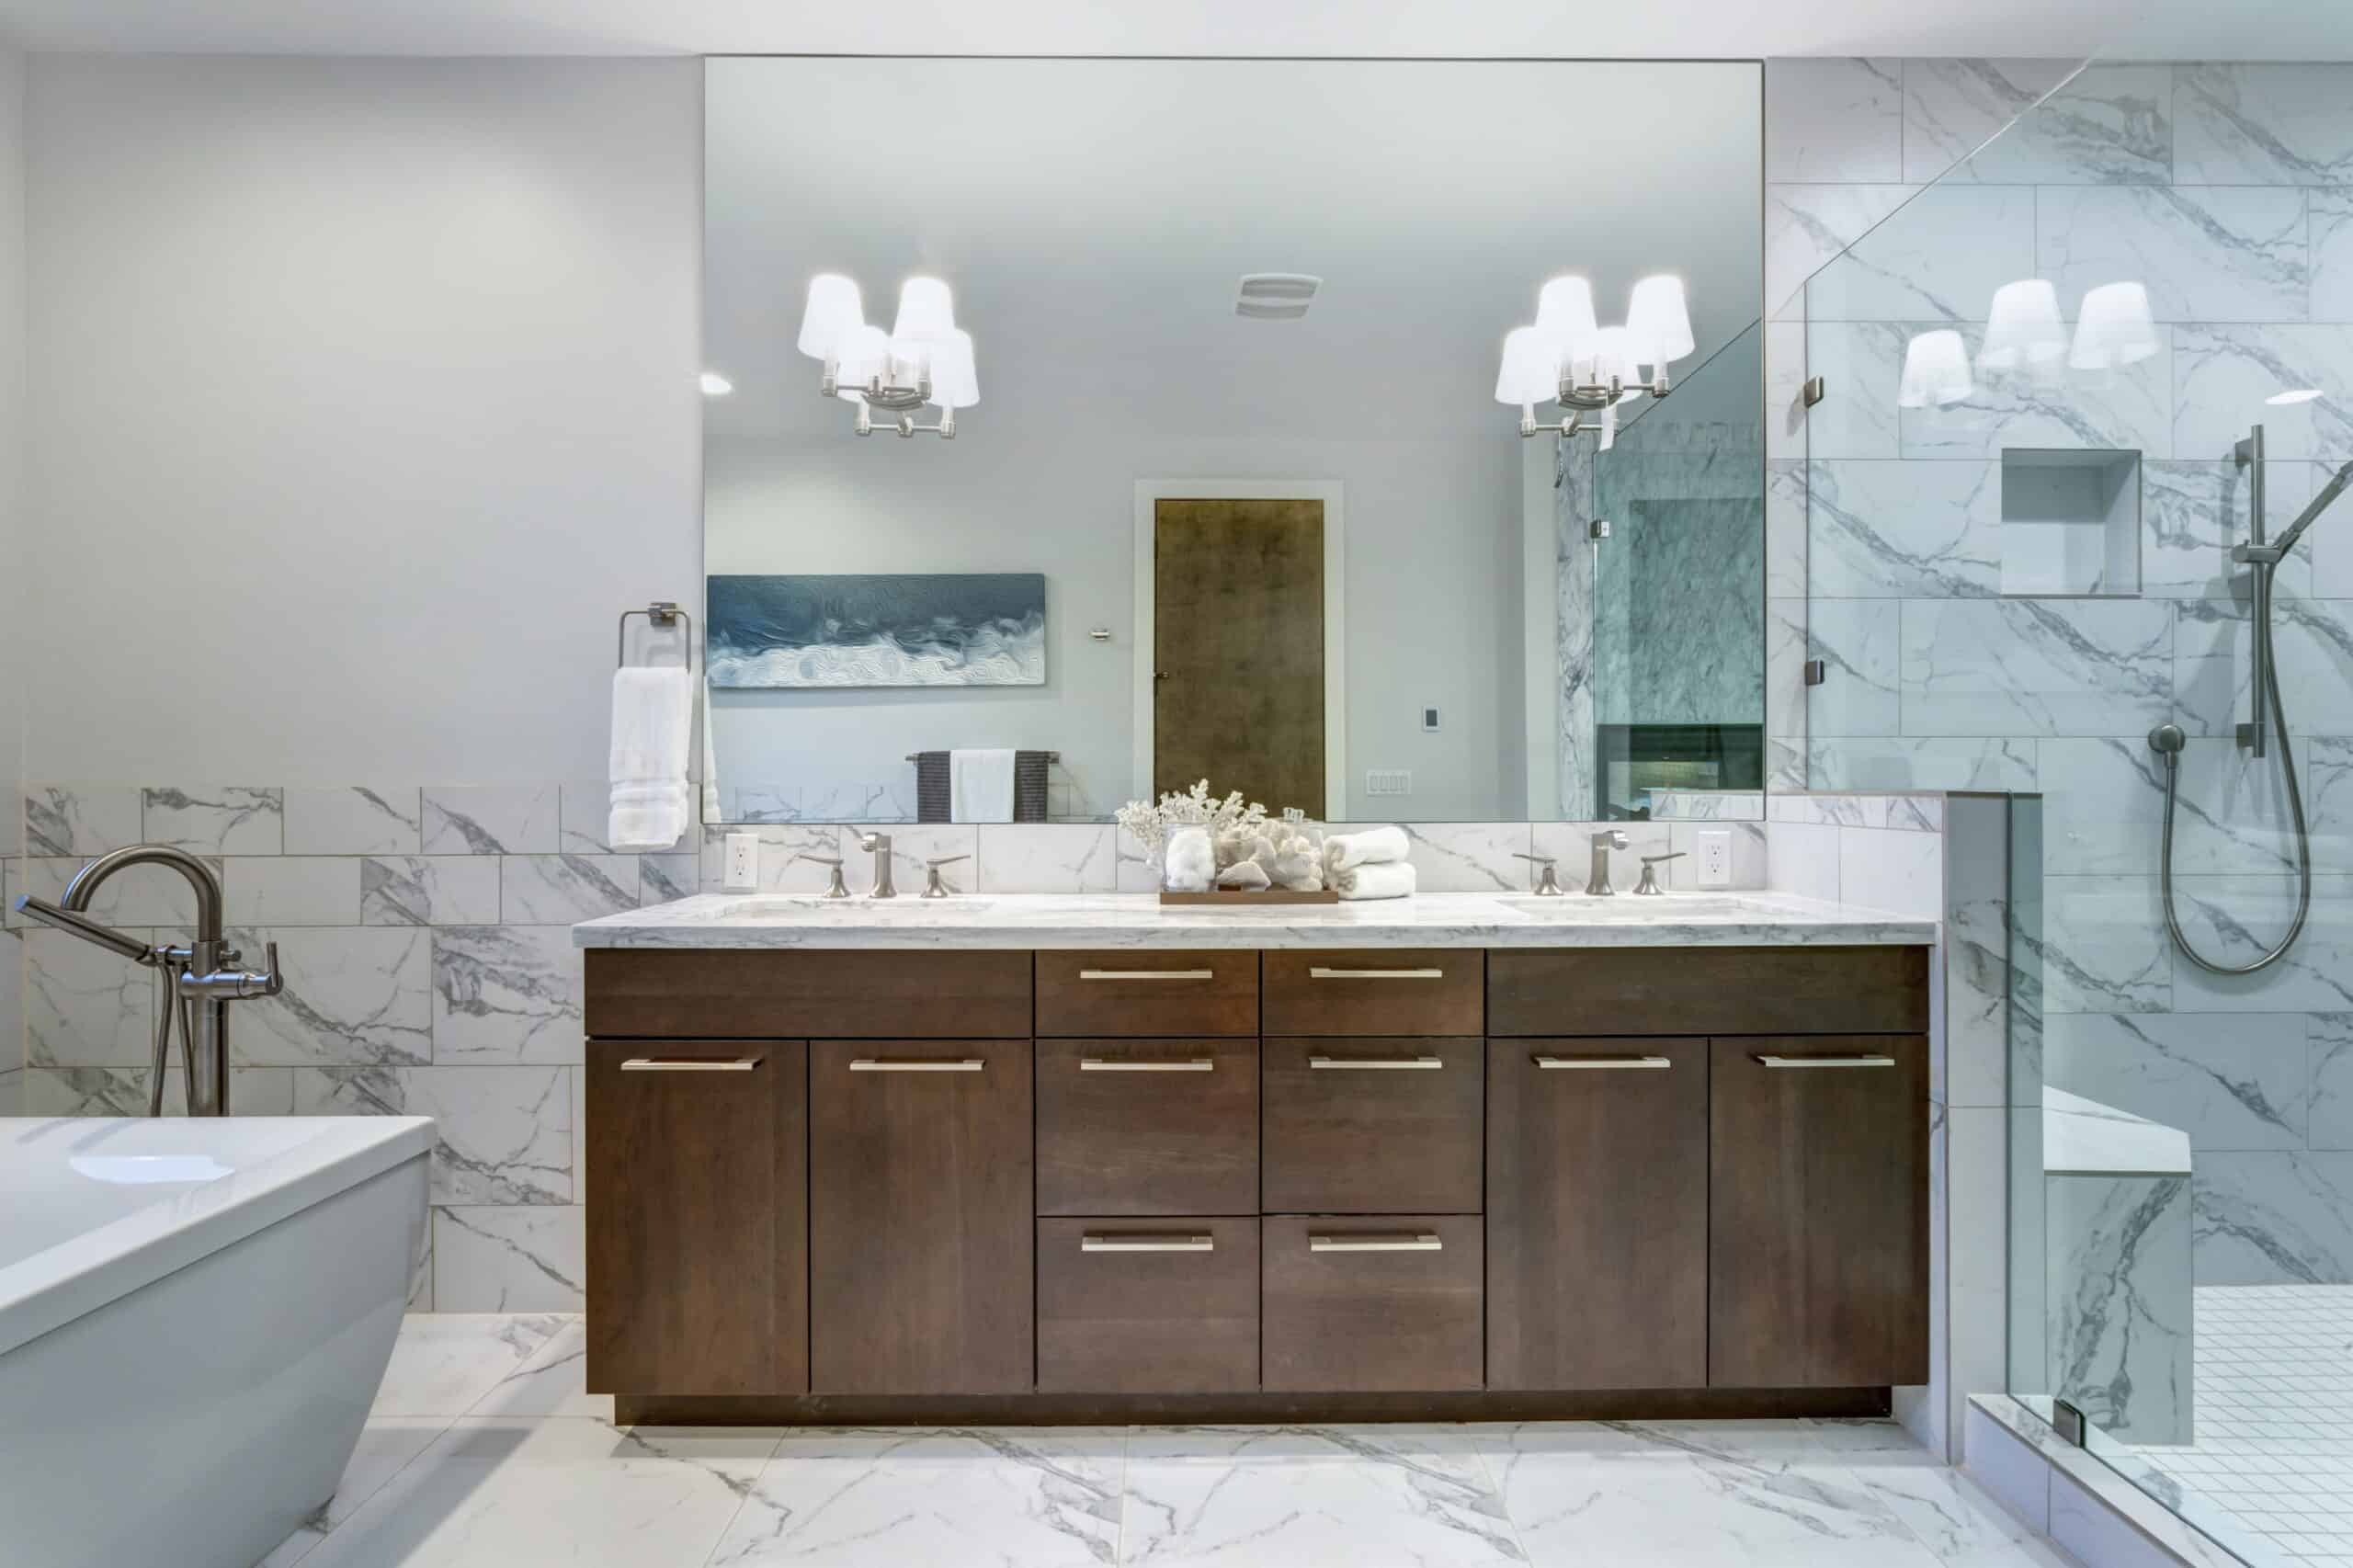 Incredible master bathroom with Carrara marble tile surround, modern glass walk in shower, espresso dual vanity cabinet and a freestanding bathtub.